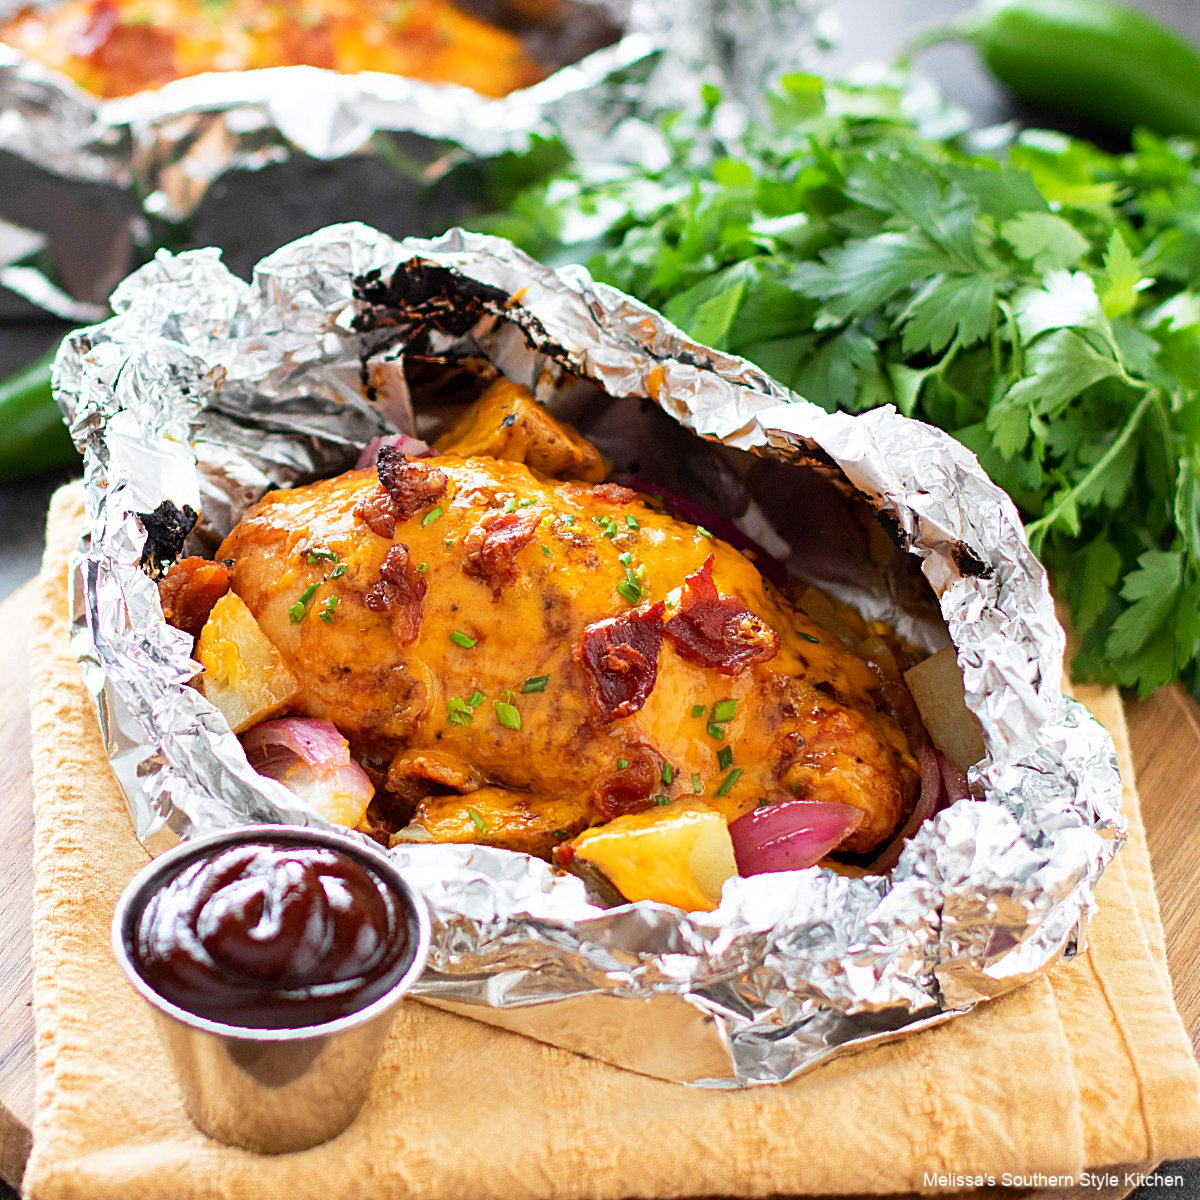 https://www.melissassouthernstylekitchen.com/wp-content/uploads/2021/07/Barbecue-Chicken-and-Potato-Foil-Packs-recipe.jpg